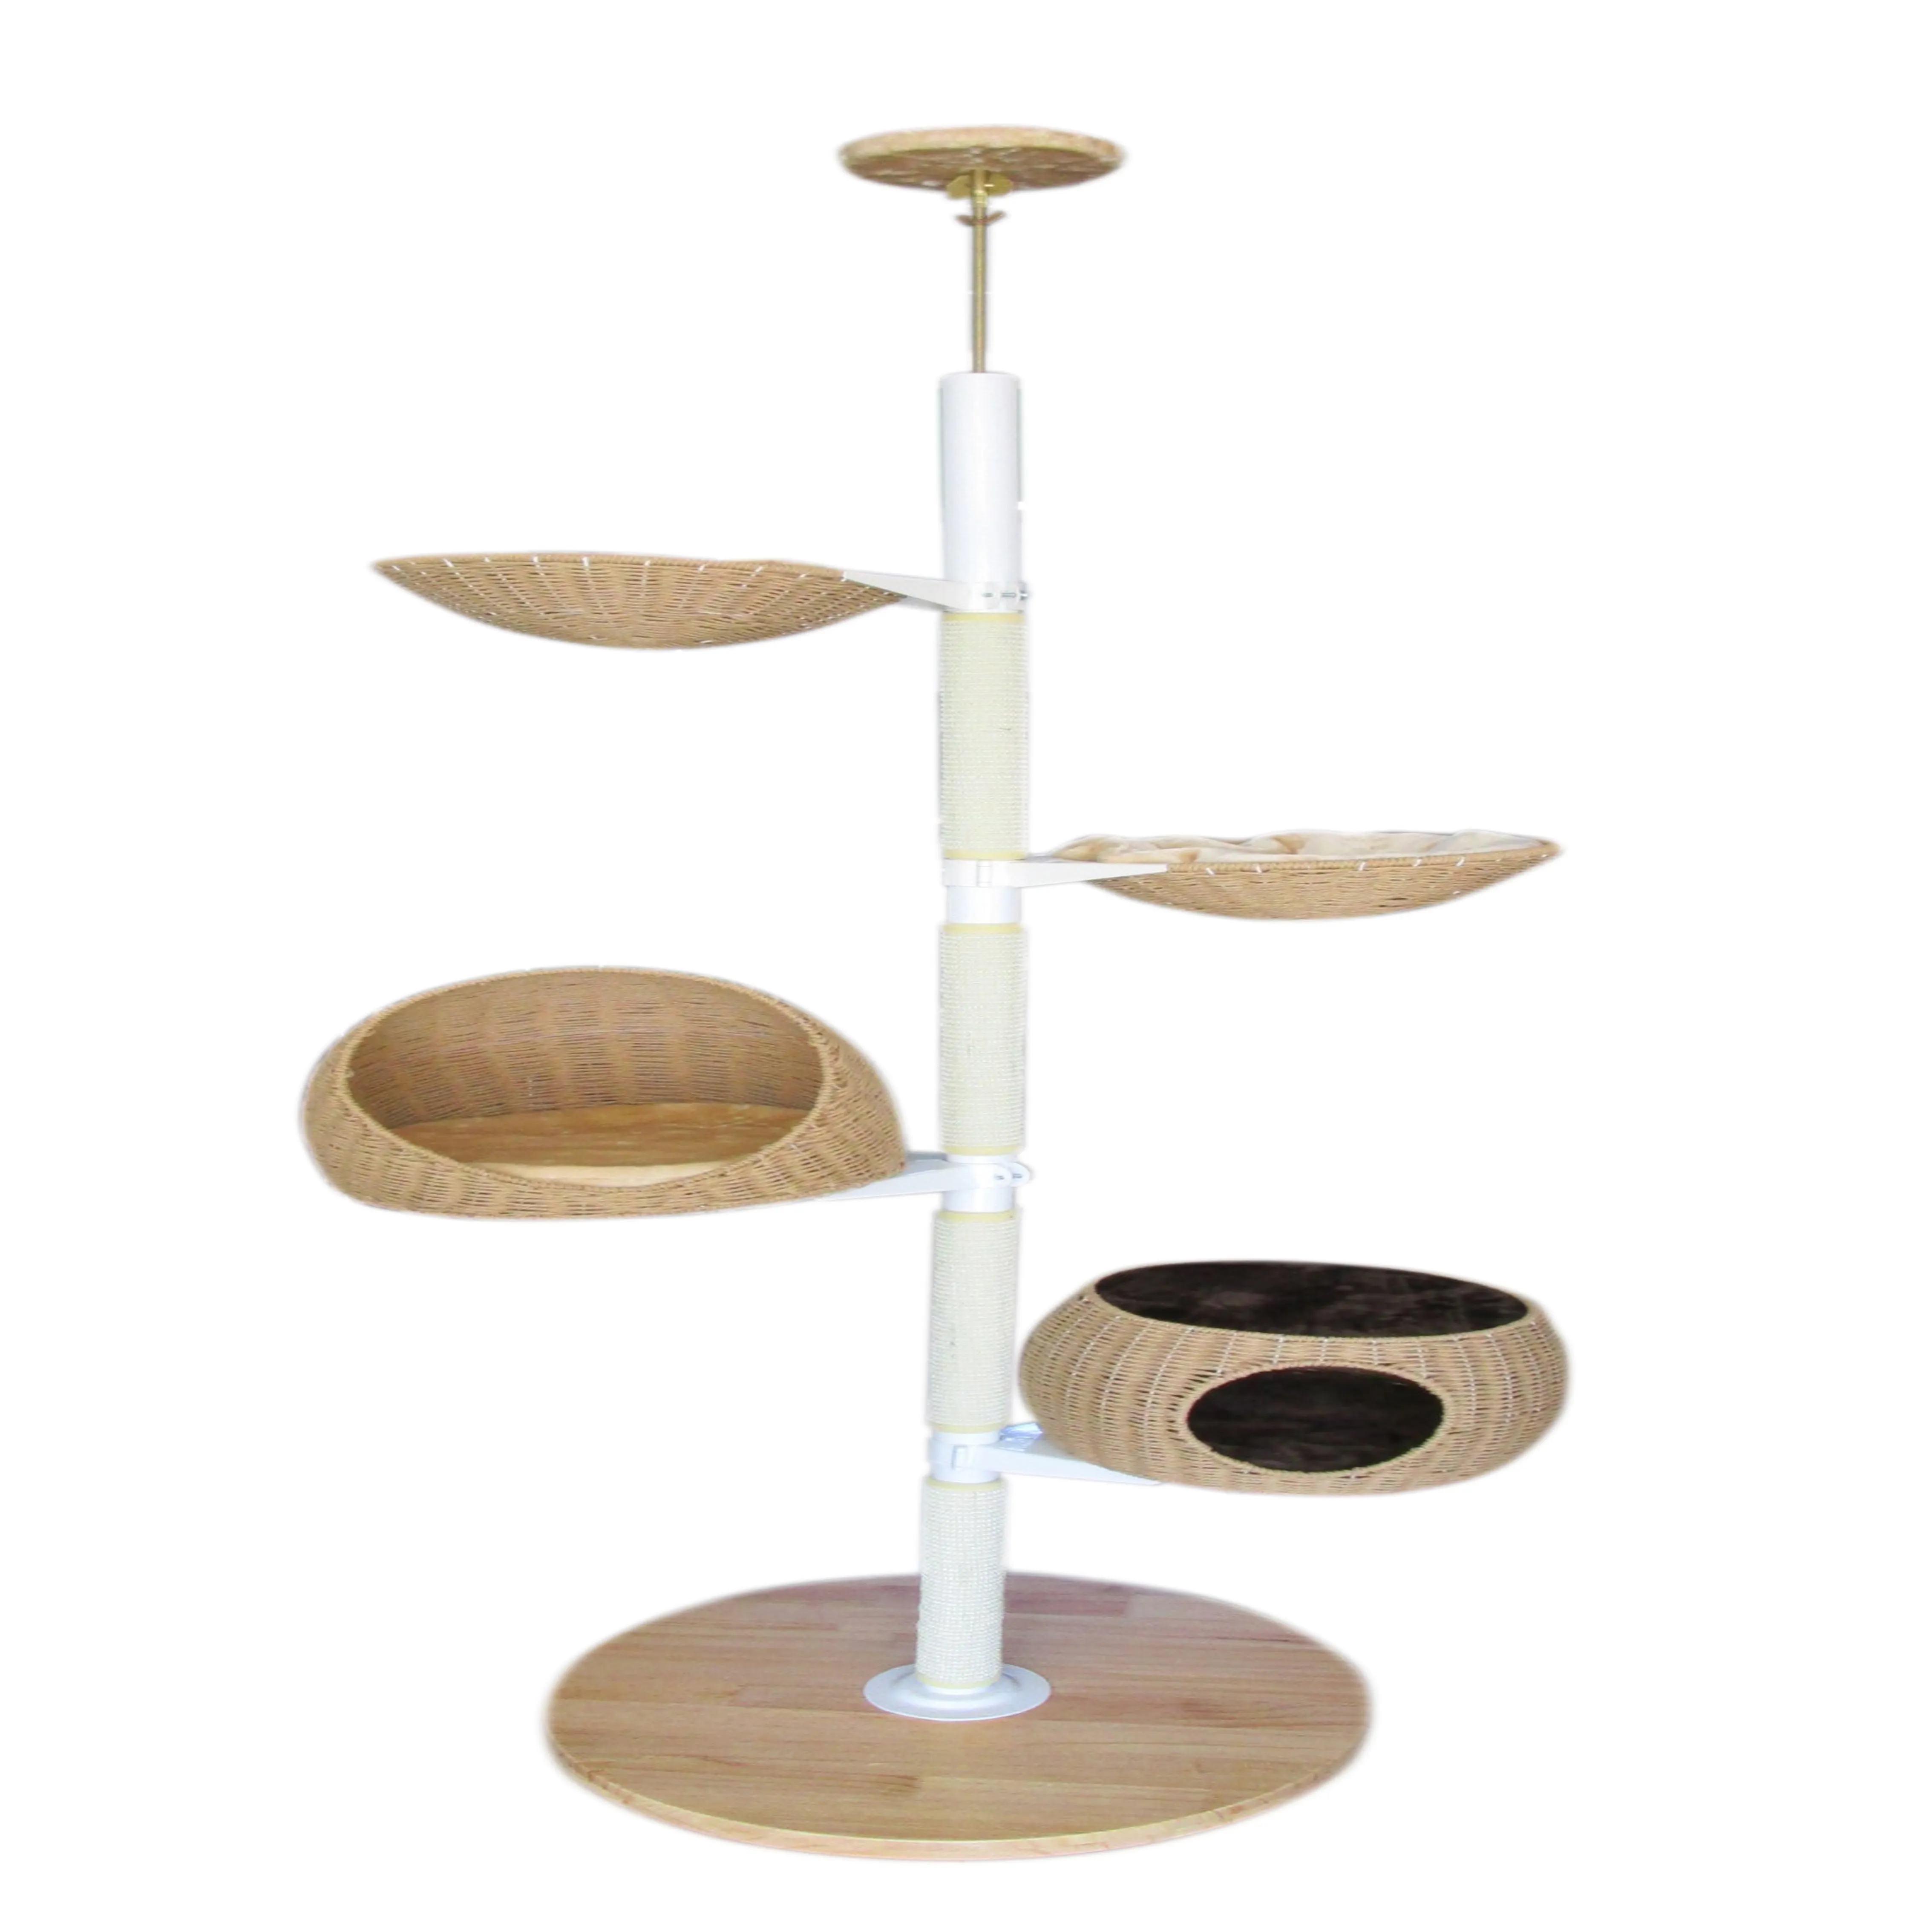 Gray beige color large wood multi level cat furniture scratching sisal post cat tree tower